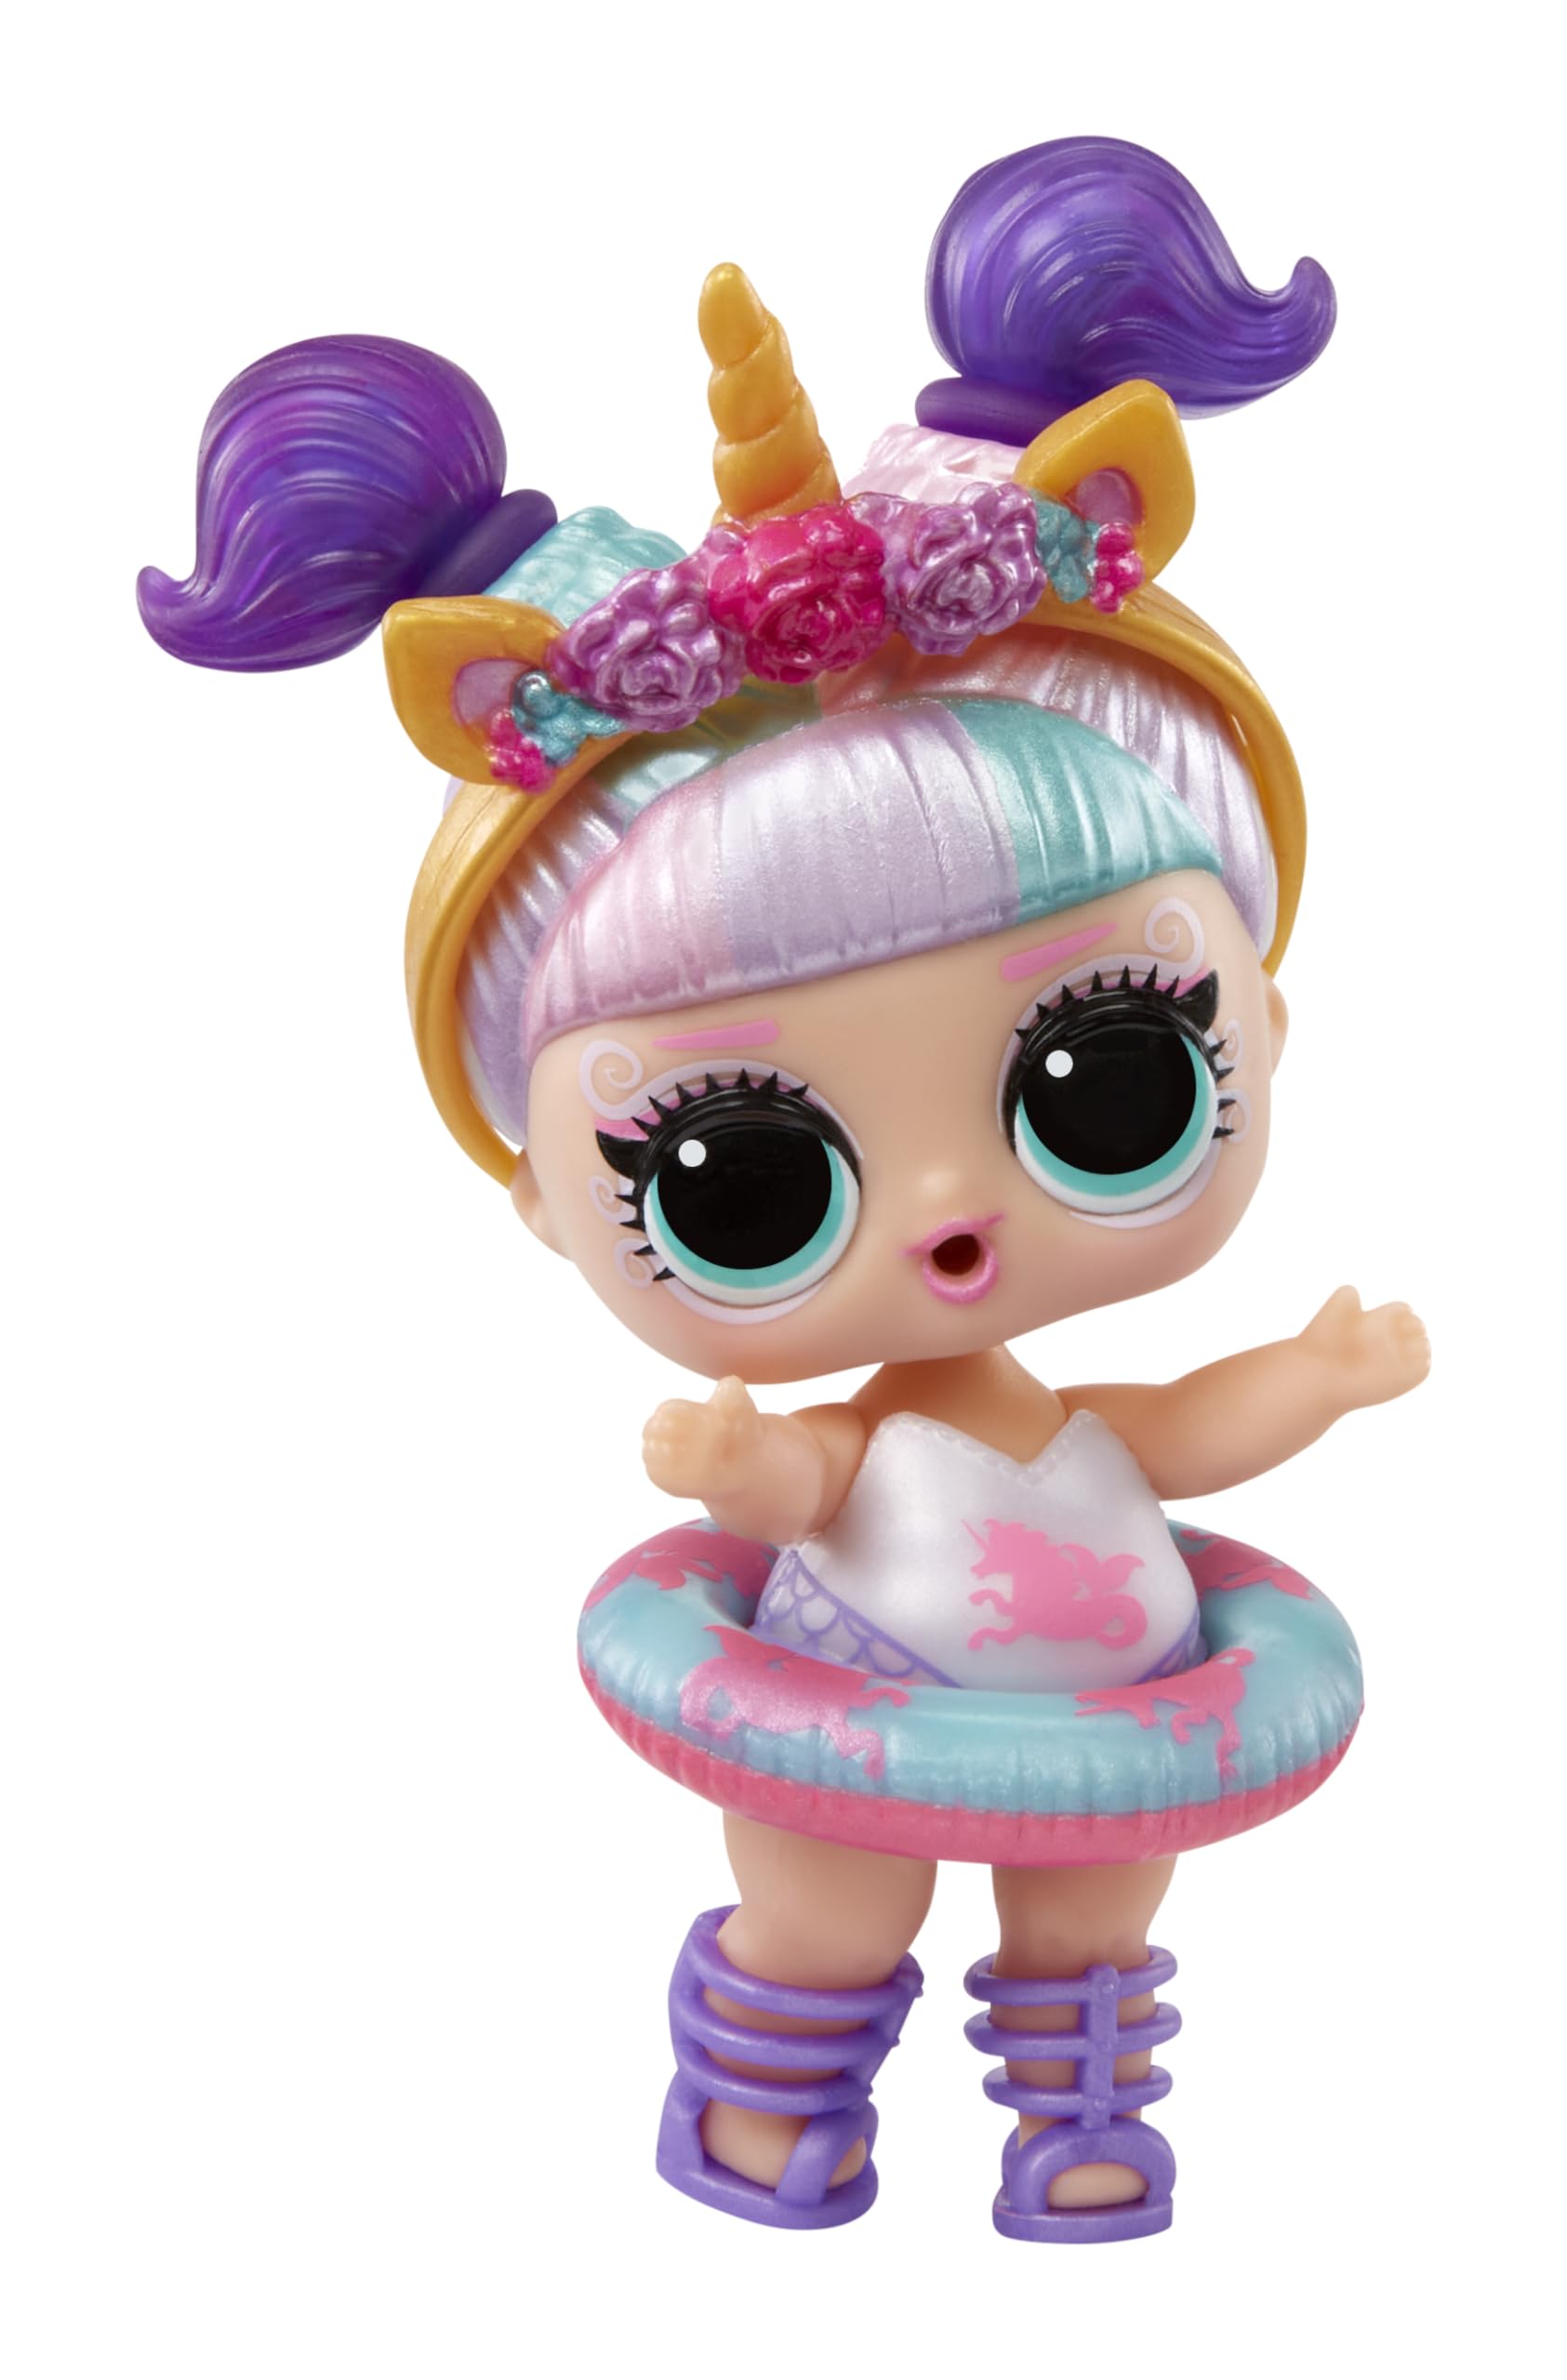 LOL Surprise Water Balloon Surprise Dolls with Collectible Doll, Water Balloon Hair, Glitter Balloons, 4 Ways to Play, Water Play, Reusable Water Balloons, Surprise Doll, Limited Edition Doll 4+